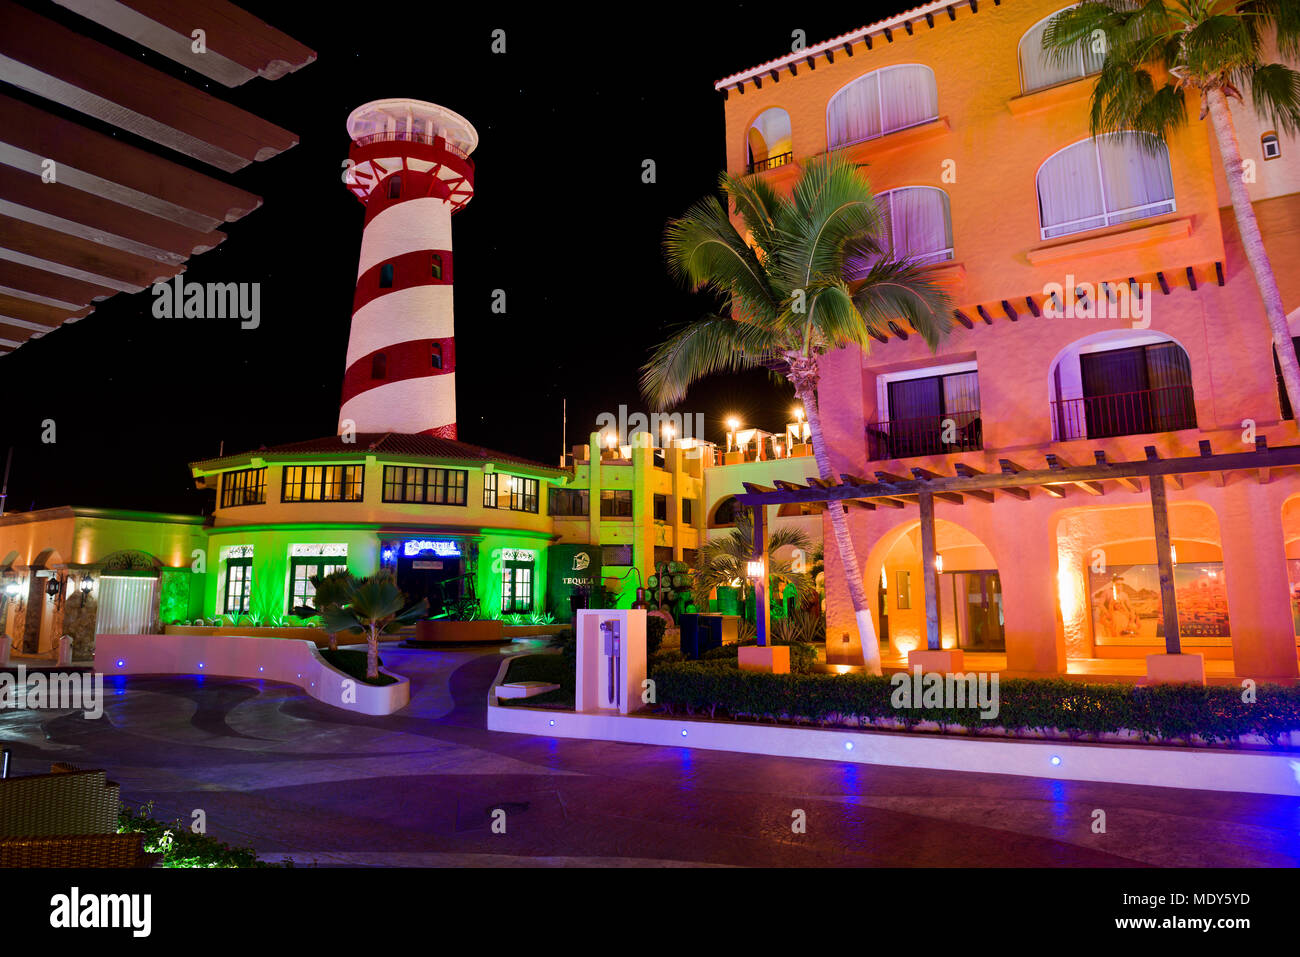 The lighthouse resturaunt in downtown Cabo; Cabo San Lucas, Baja California, Sur, Mexico Stock Photo